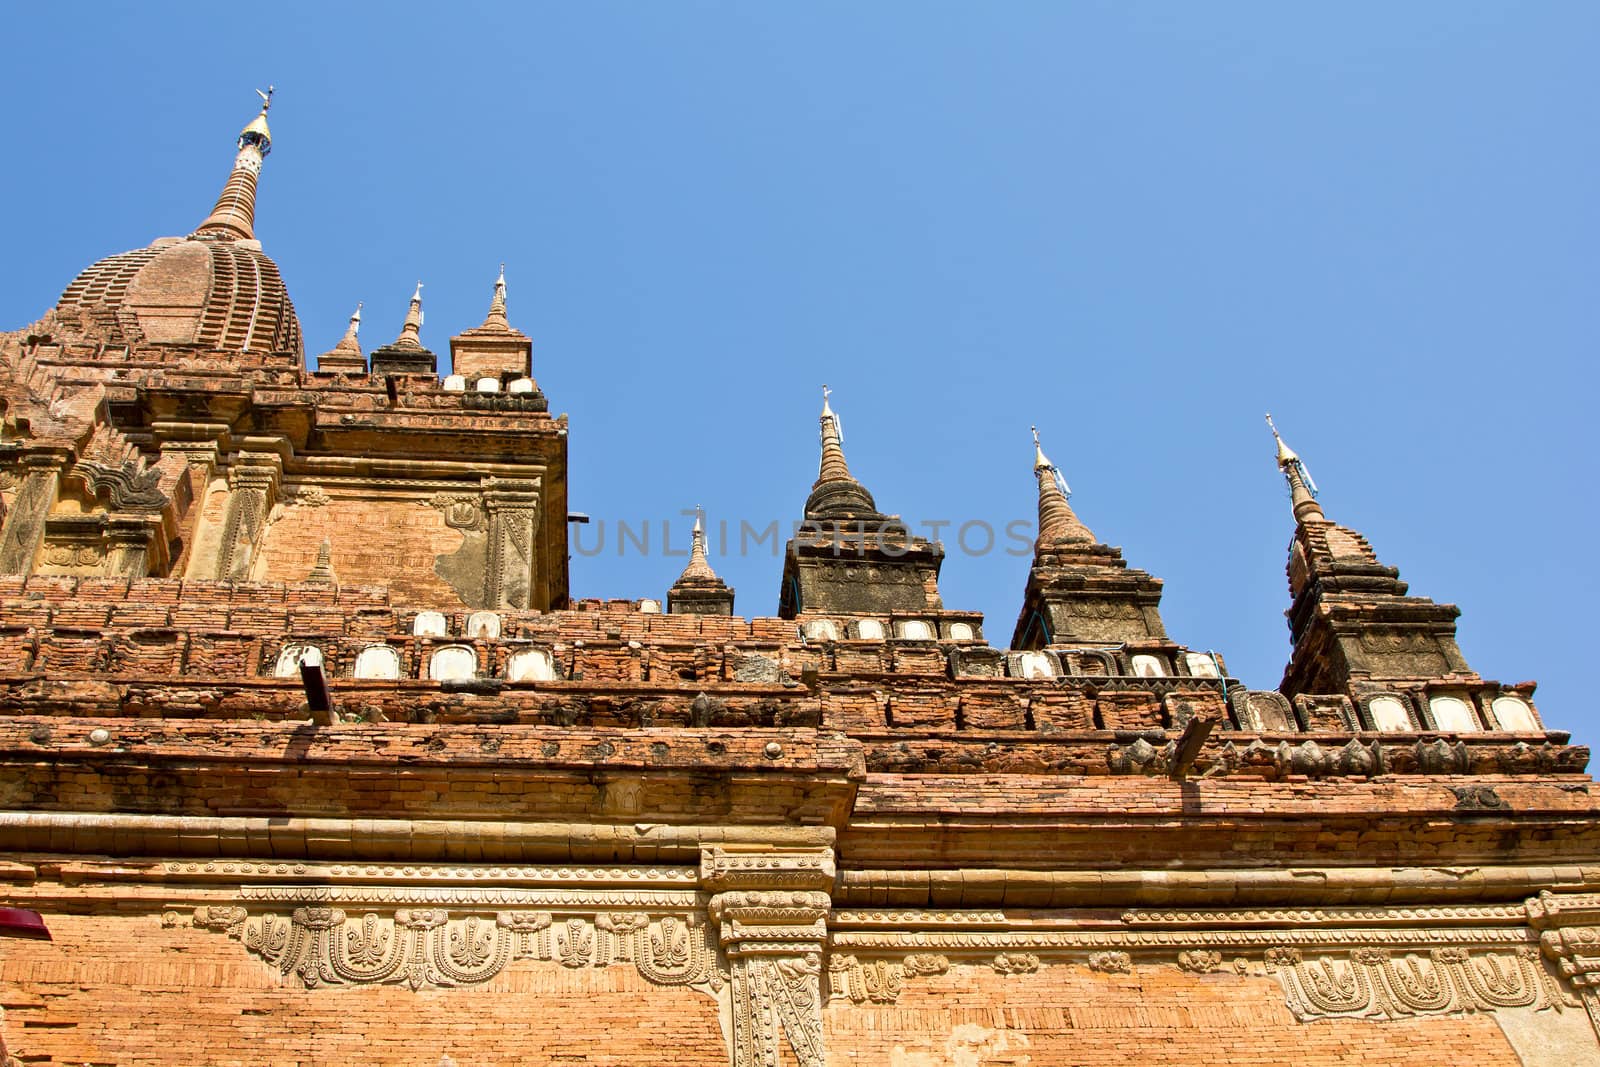 Pagoda in a Temple in Bagan,Burma by vanillaechoes